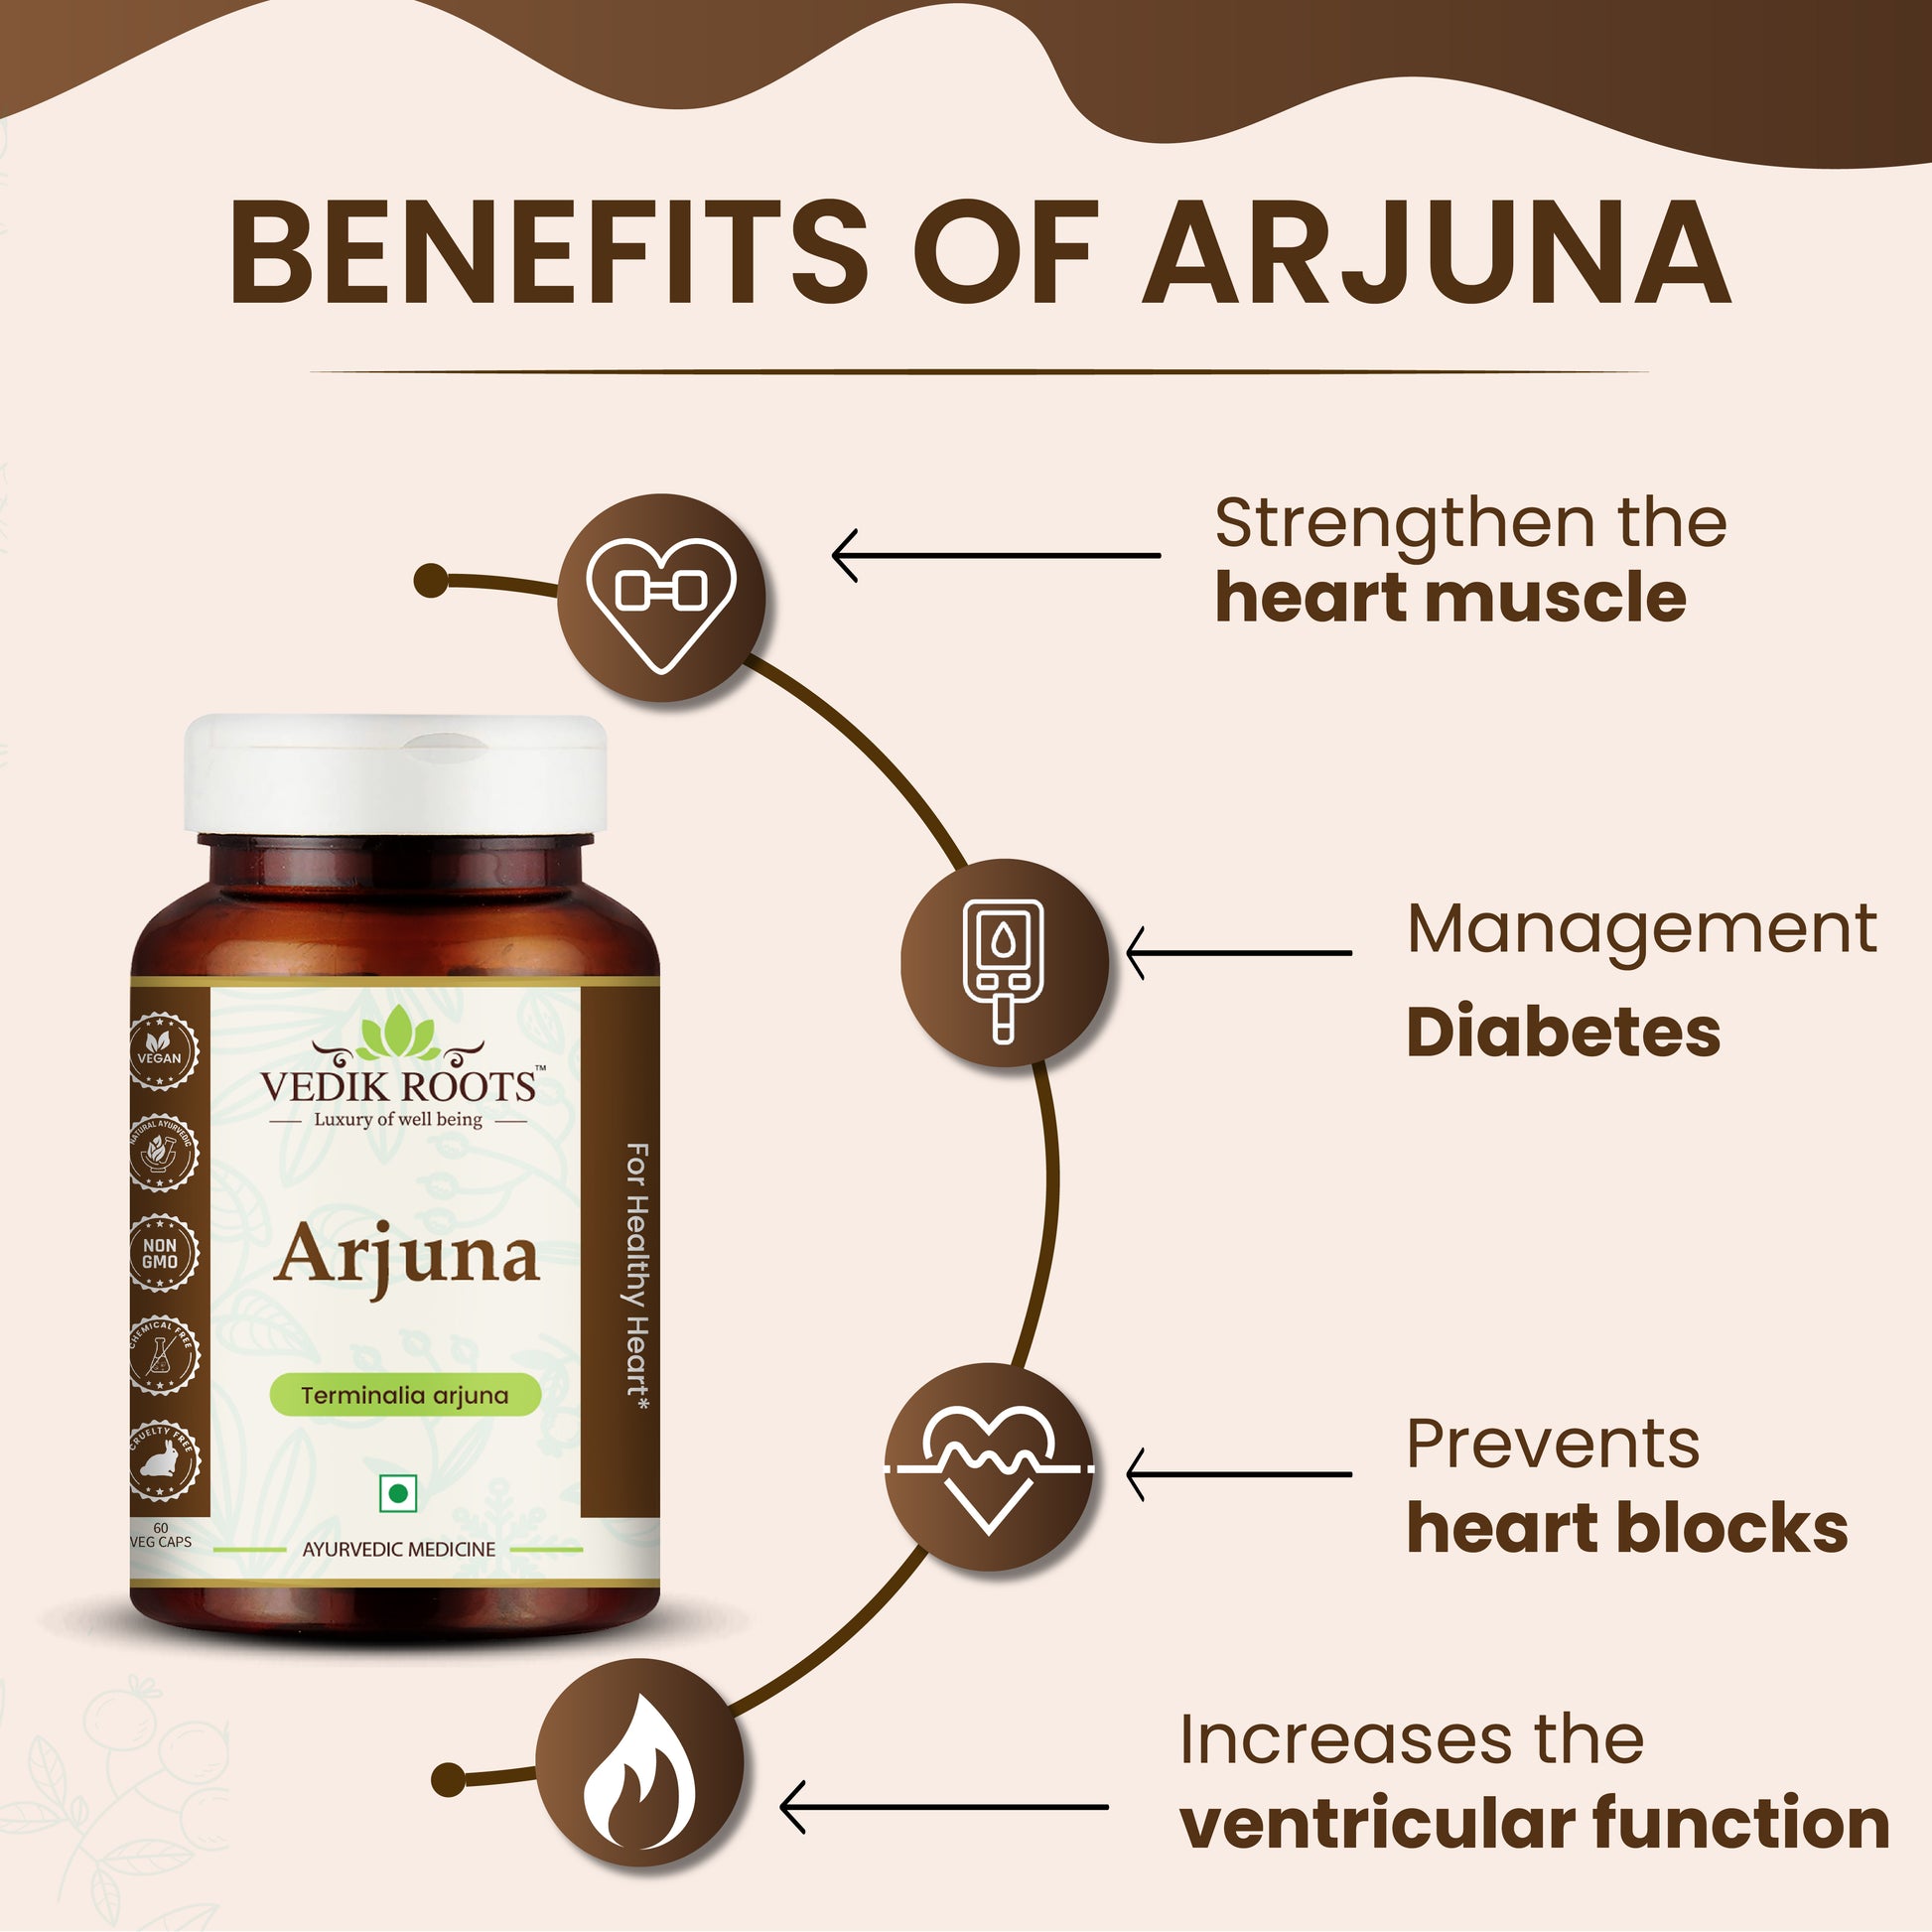 Buy Arjuna Products Online in India